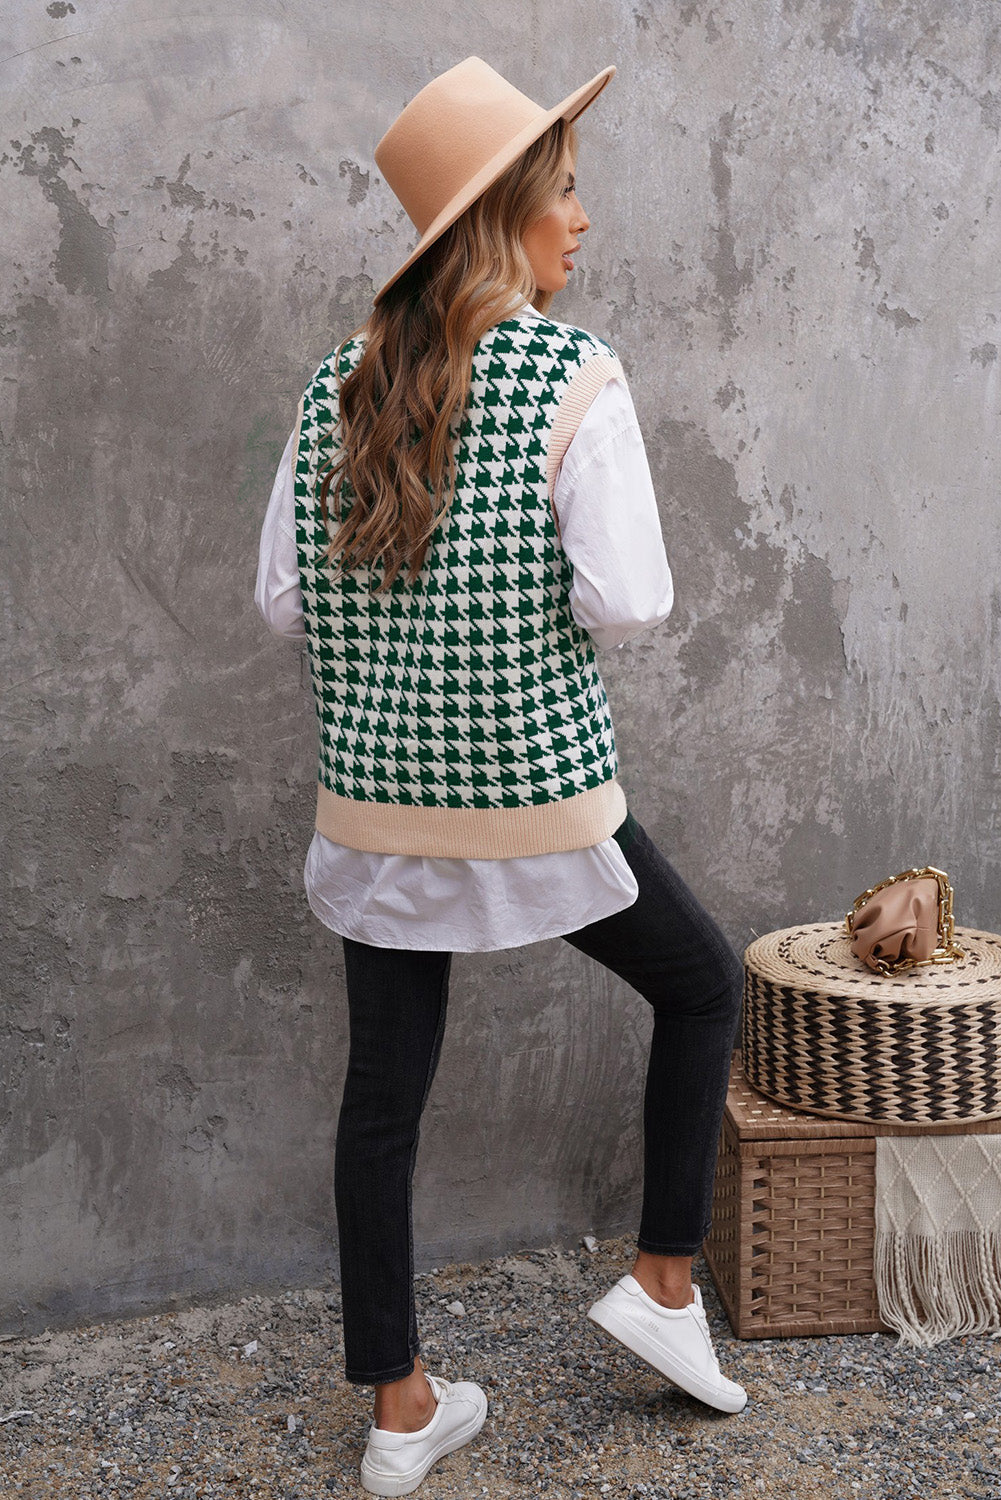 Cute Fall Houndstooth Vest Cardigan